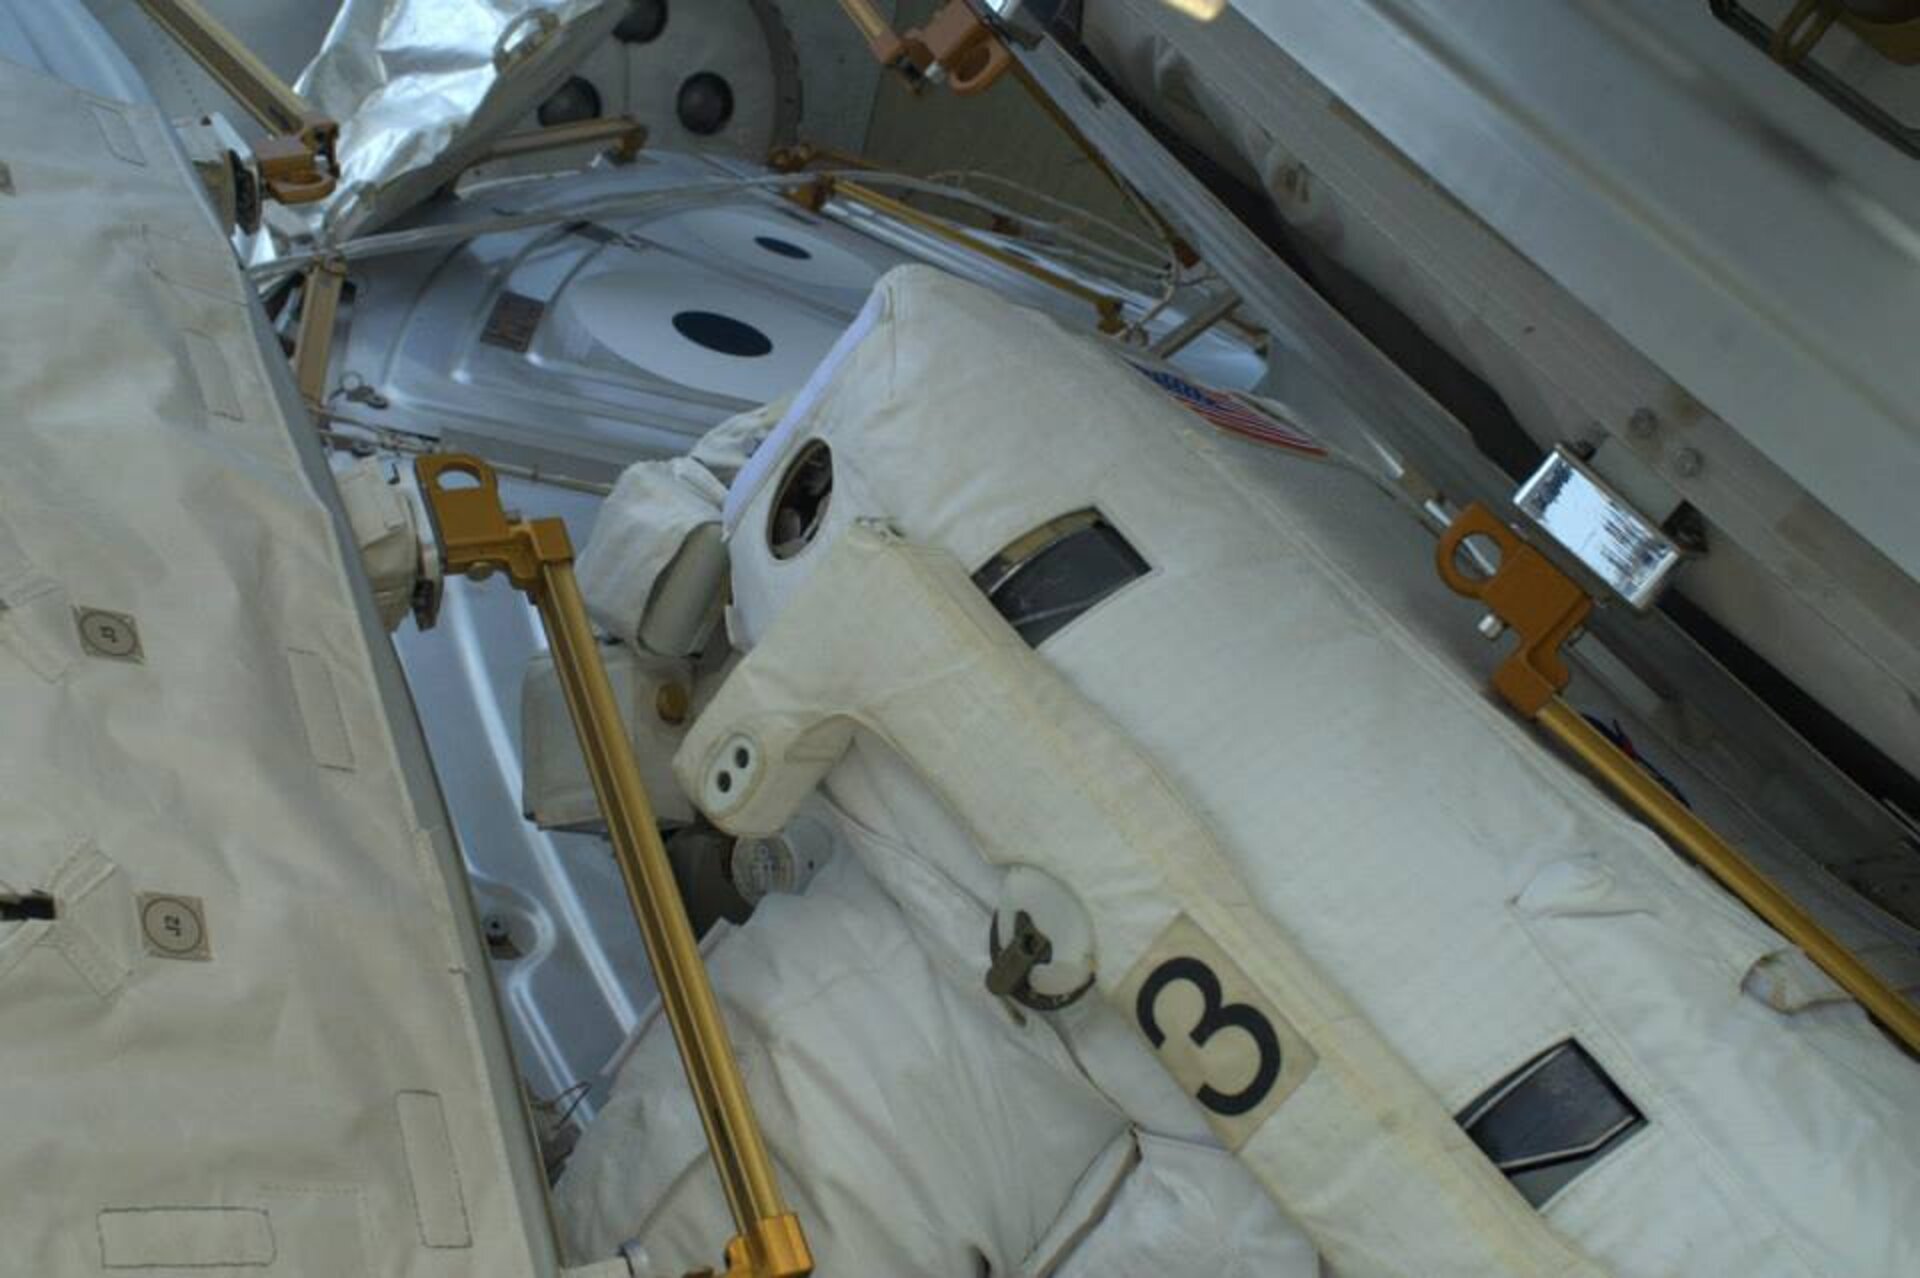 Luca "jammed"between three ISS modules.